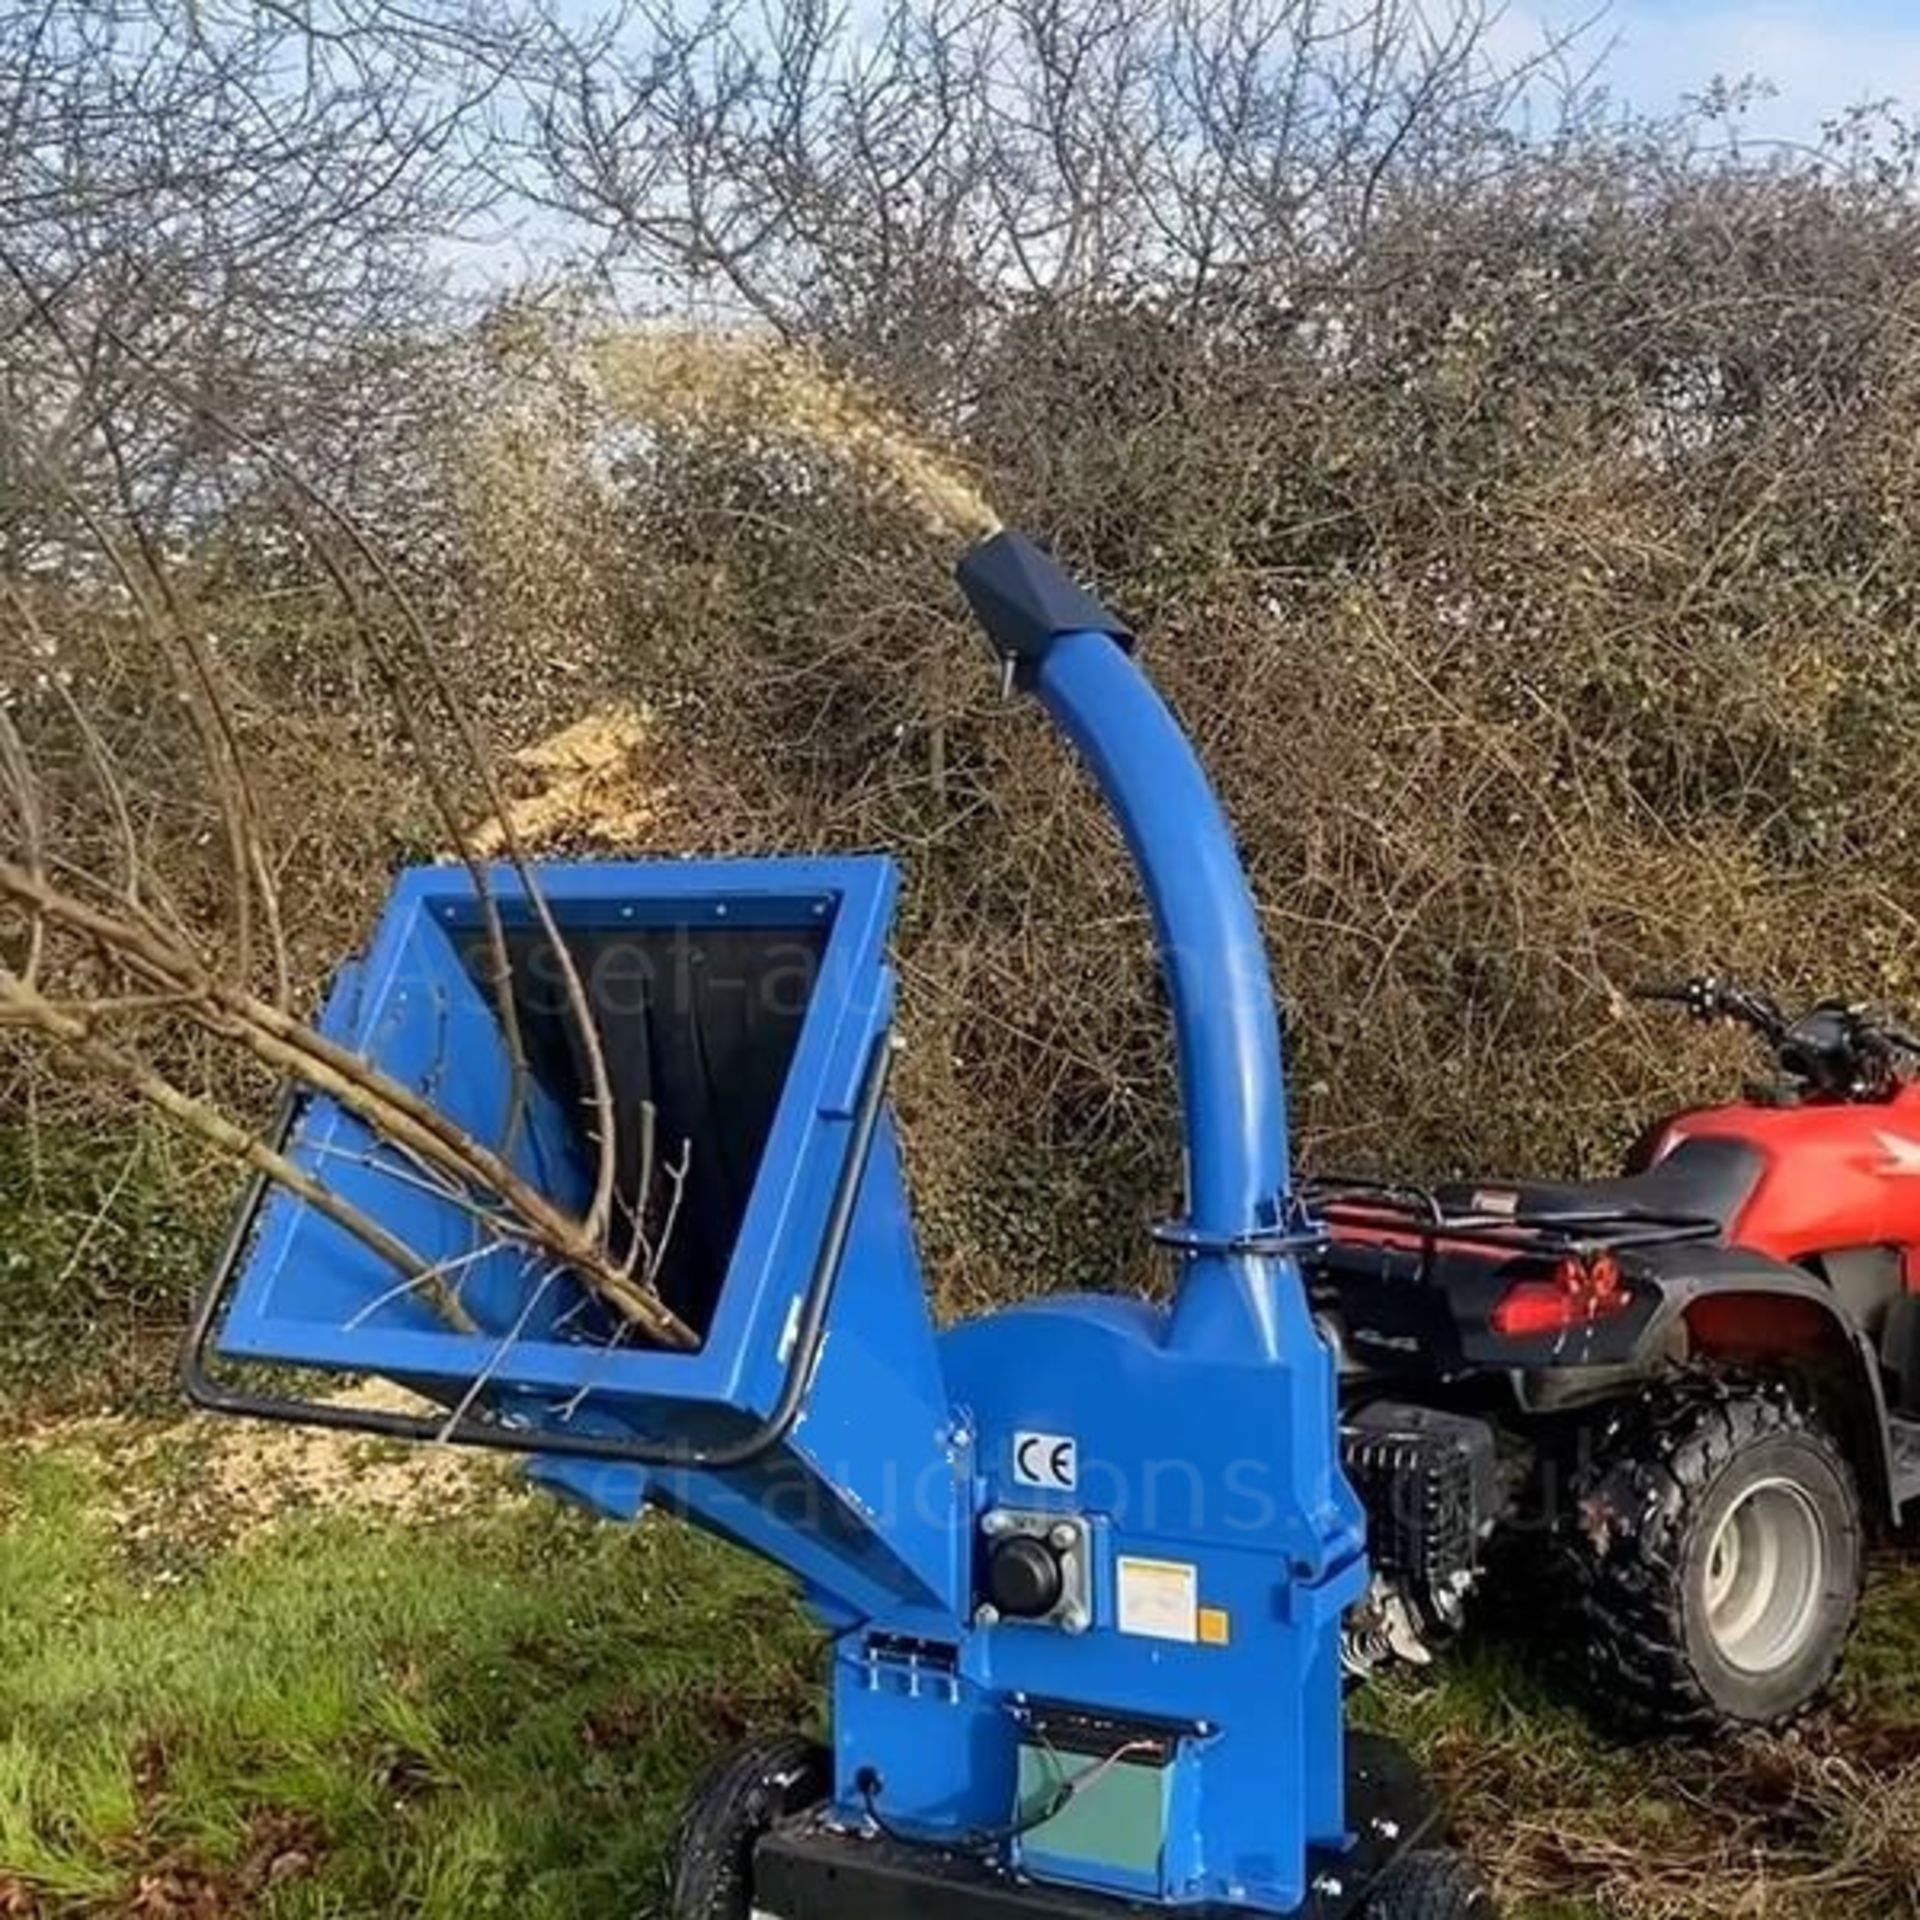 NEW AND UNUSED 15100TE 420cc 4.5" TOWABLE PETROL WOOD CHIPPER, RRP OVER £2400 *PLUS VAT* - Image 5 of 5